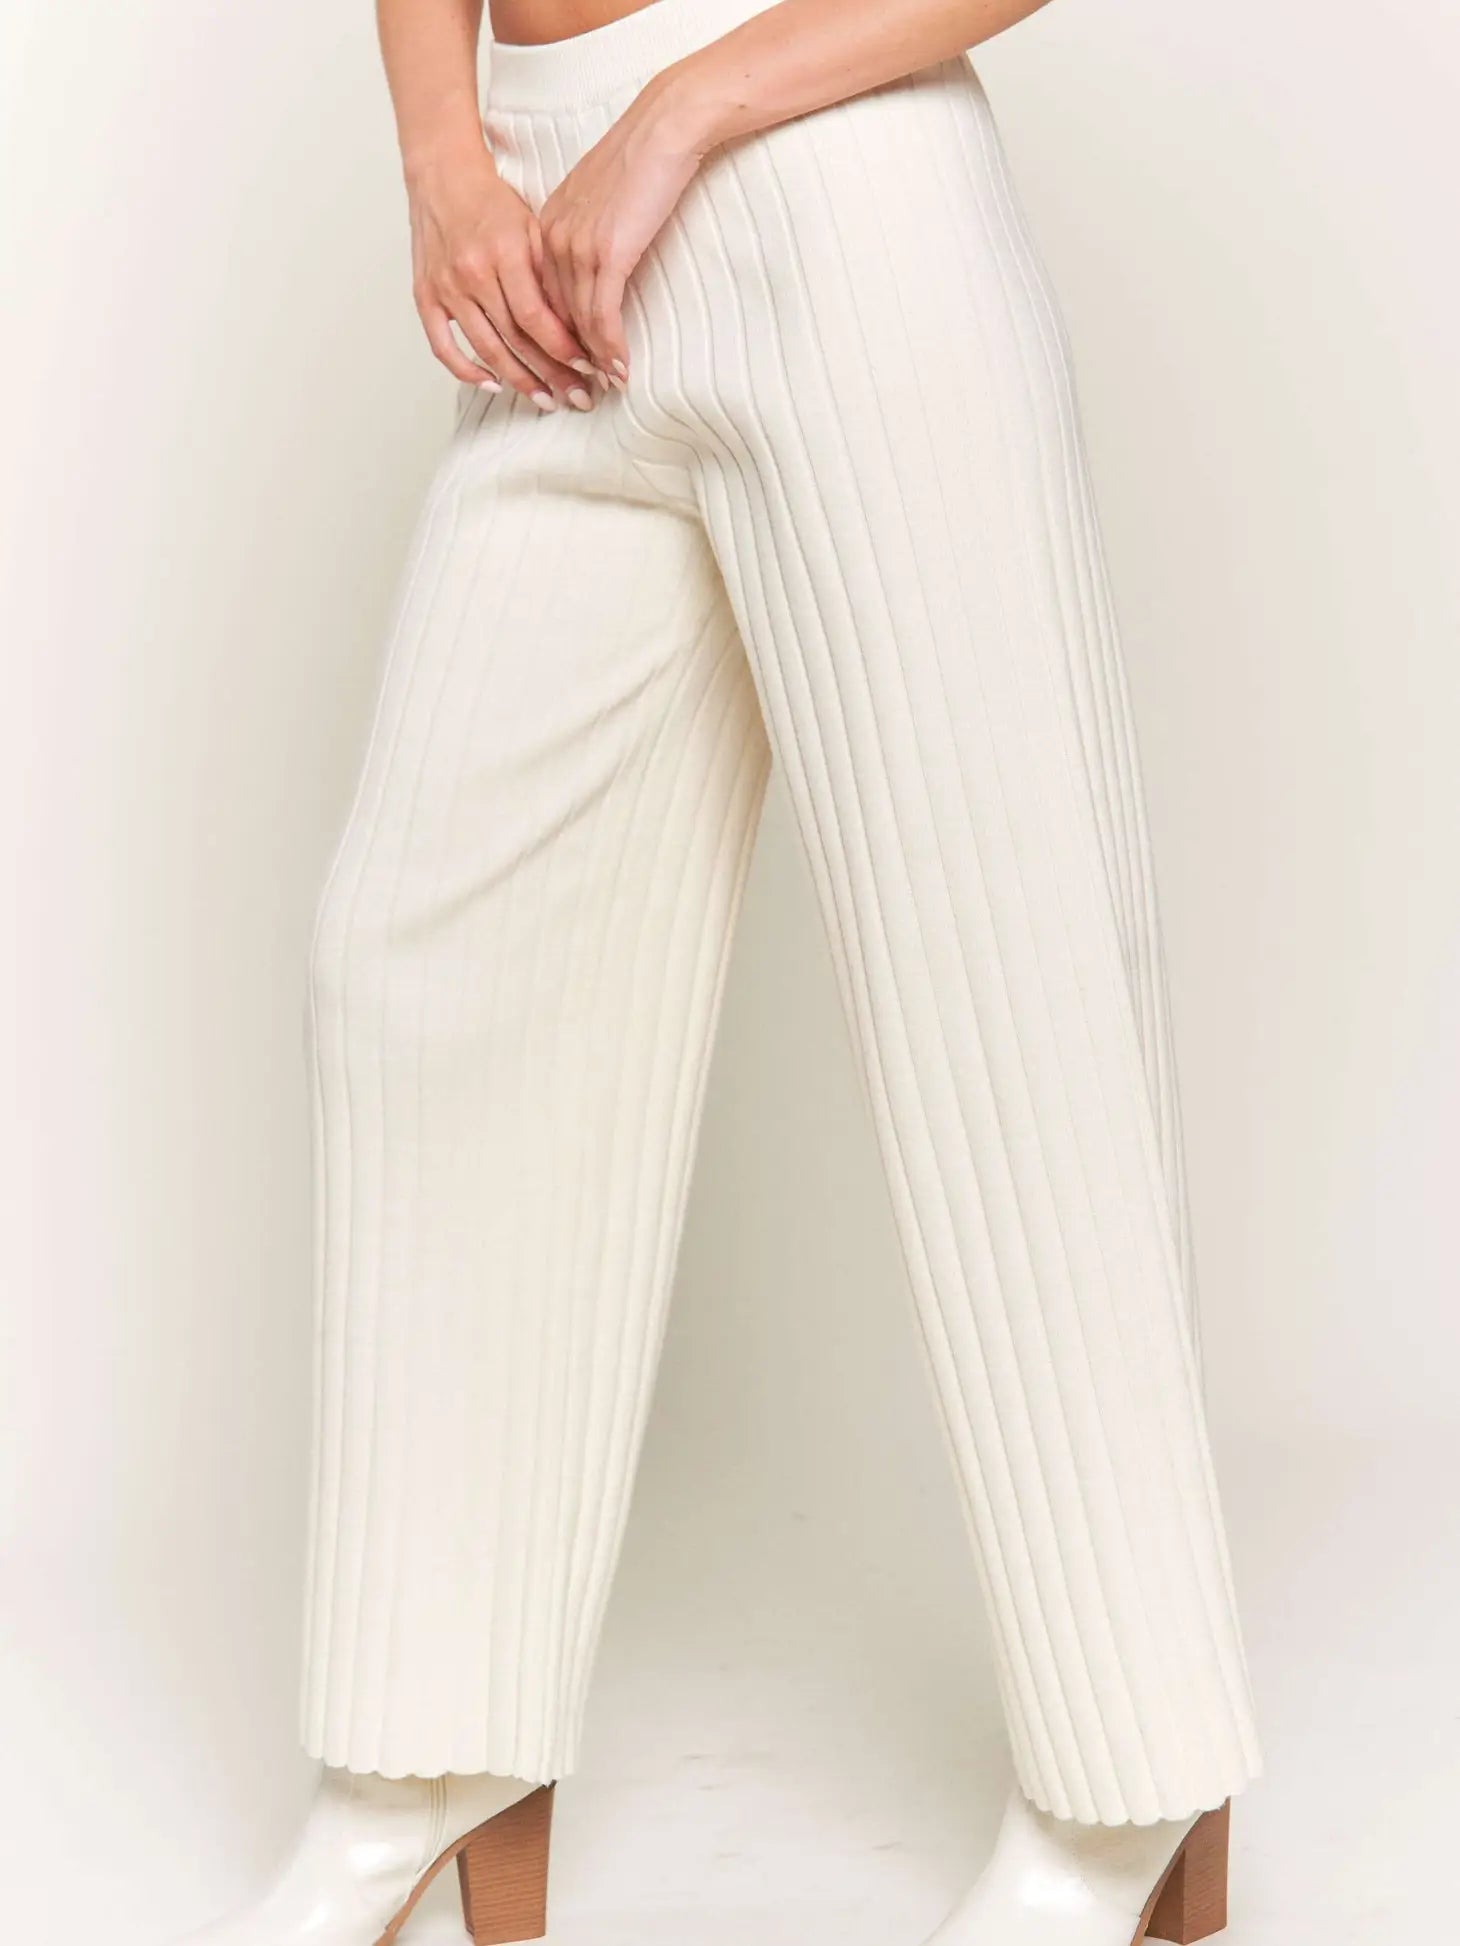 Ivory Ribbed Sweater Pants